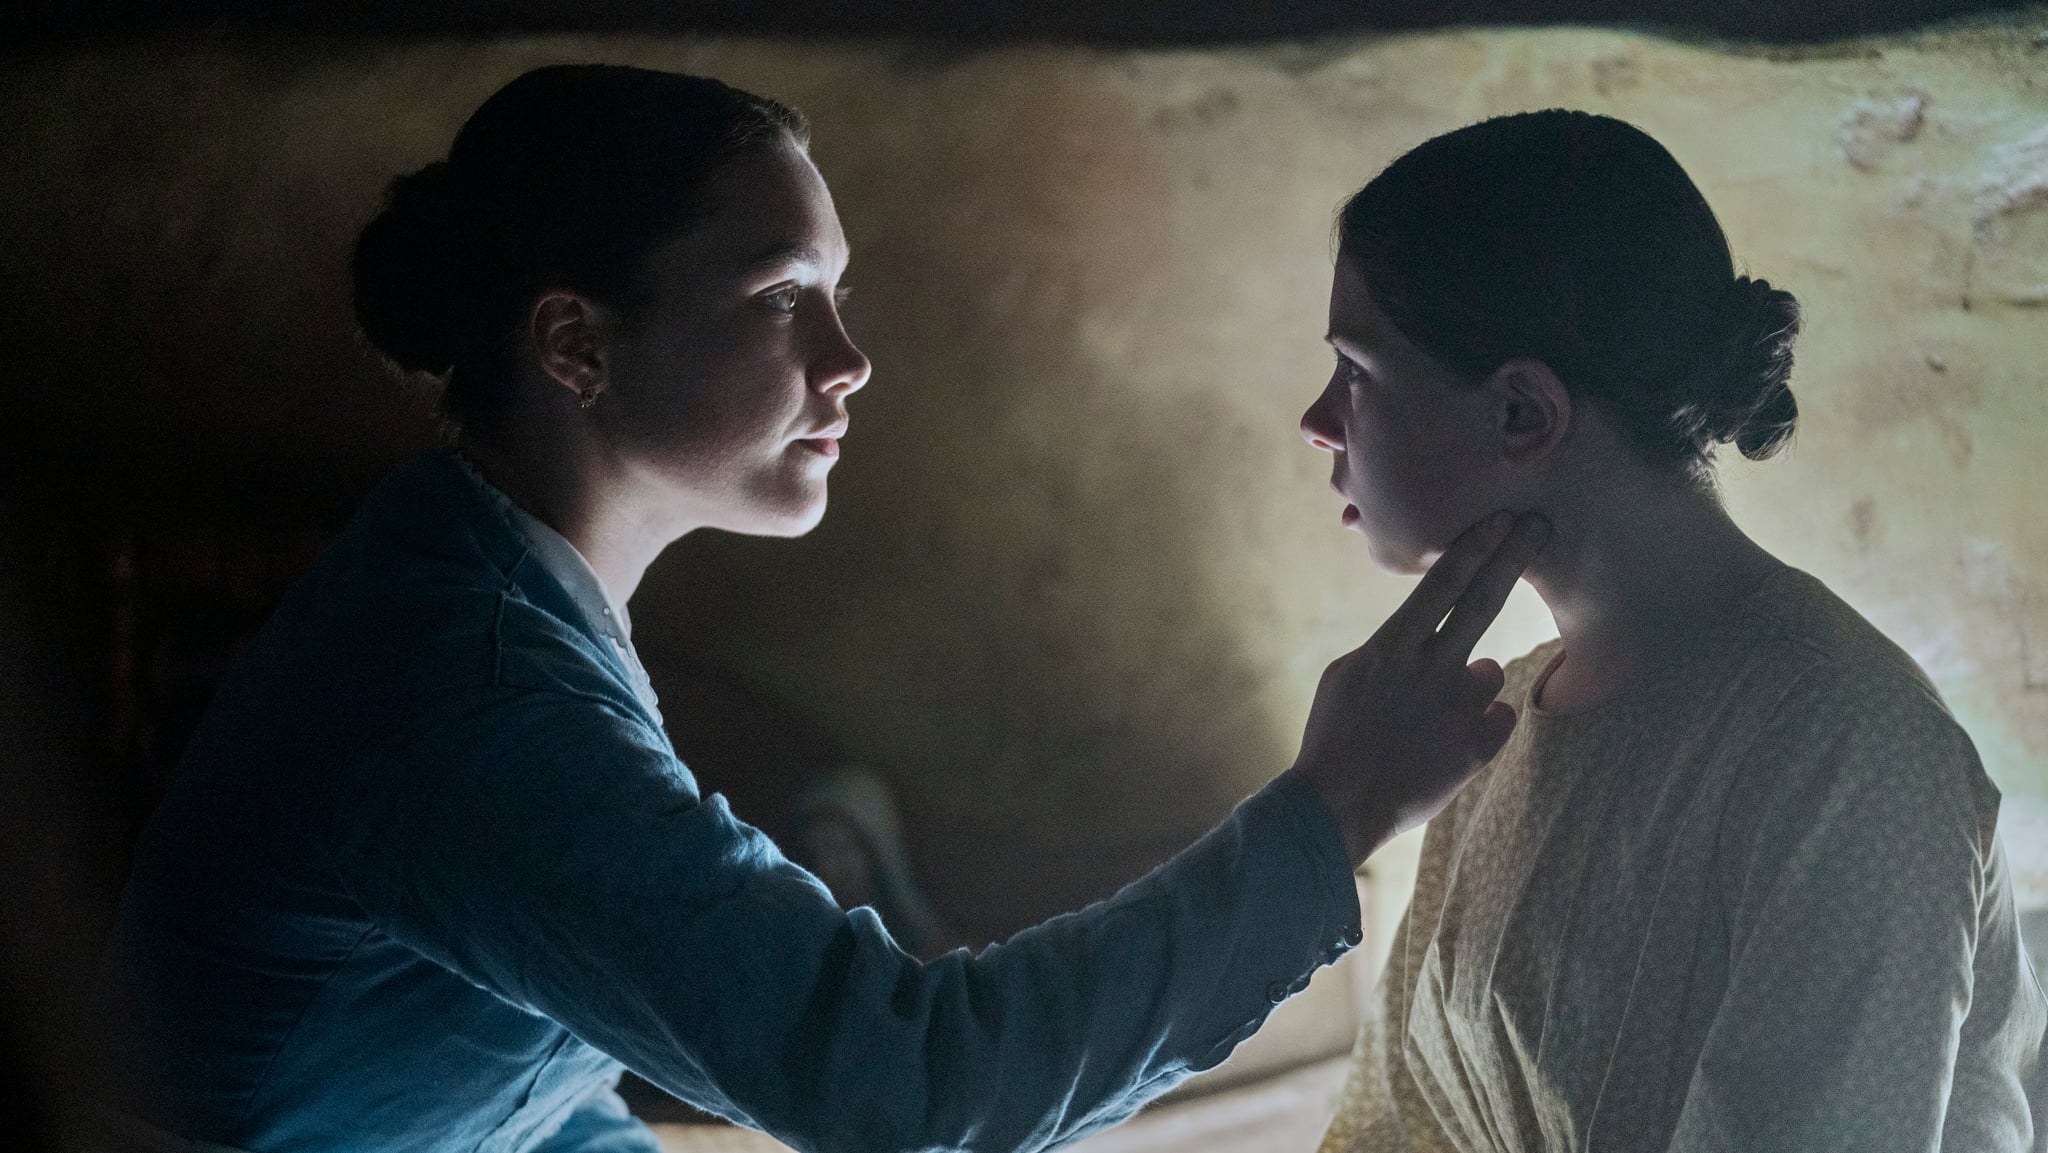 The Wonder. (L to R) Florence Pugh as Lib Wright, Kíla Lord Cassidy as Anna O'Donnell in The Wonder. Cr. Aidan Monaghan/Netflix © 2022